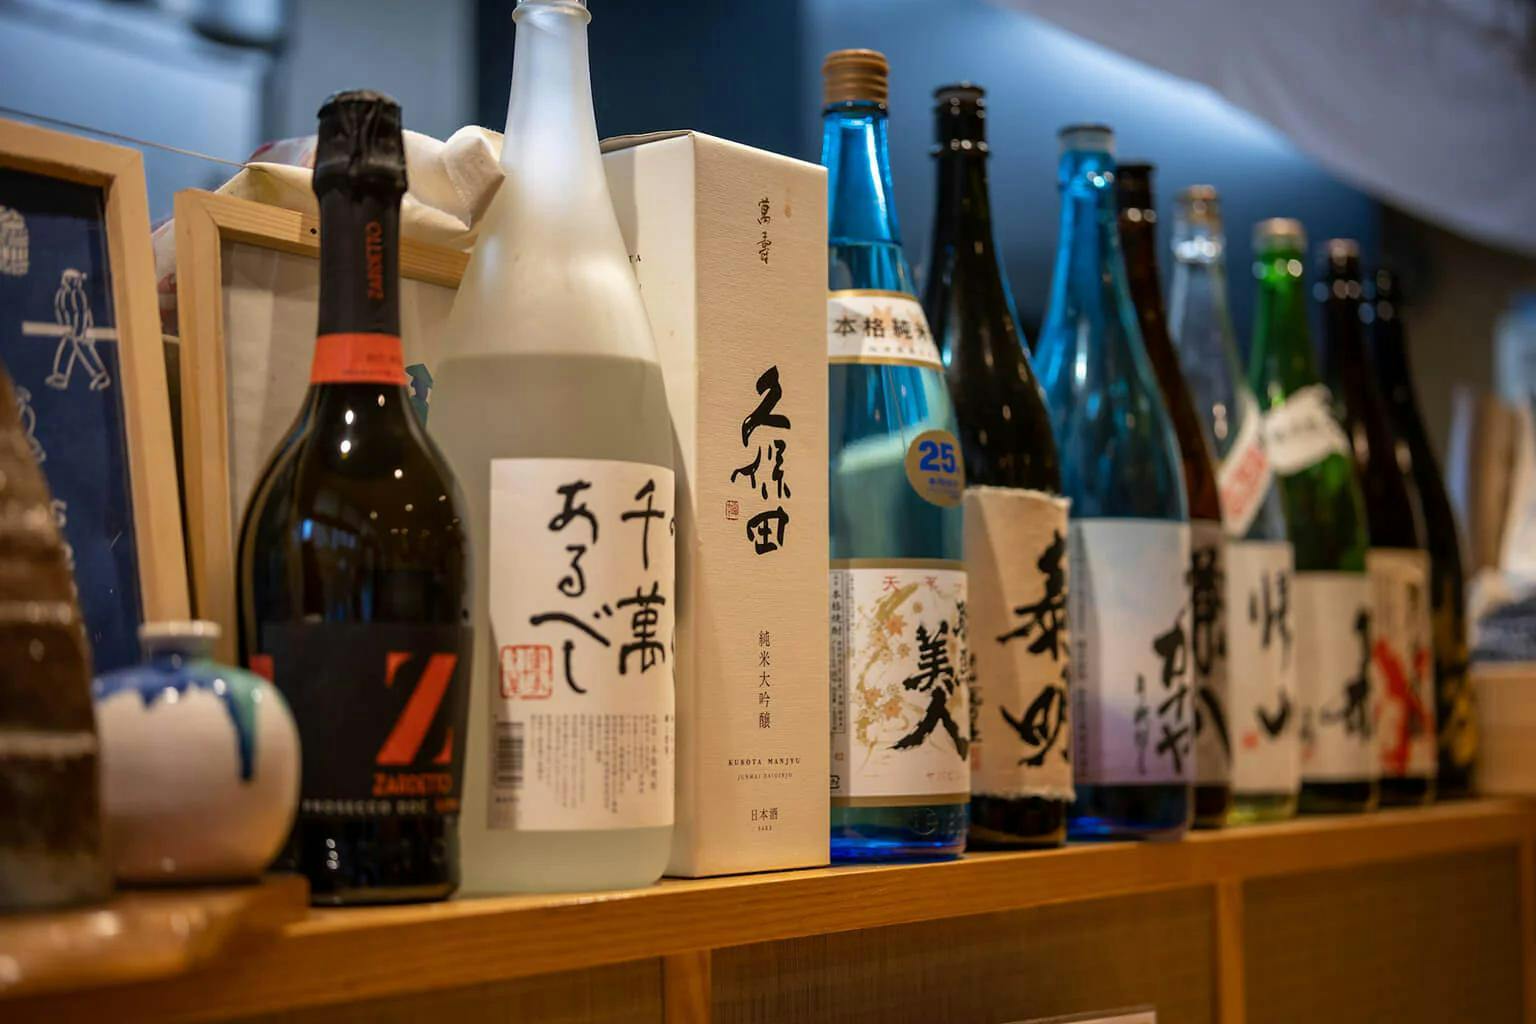 Sake bottles come in various sizes and colors, and the sake itself can be made in numerous styles.